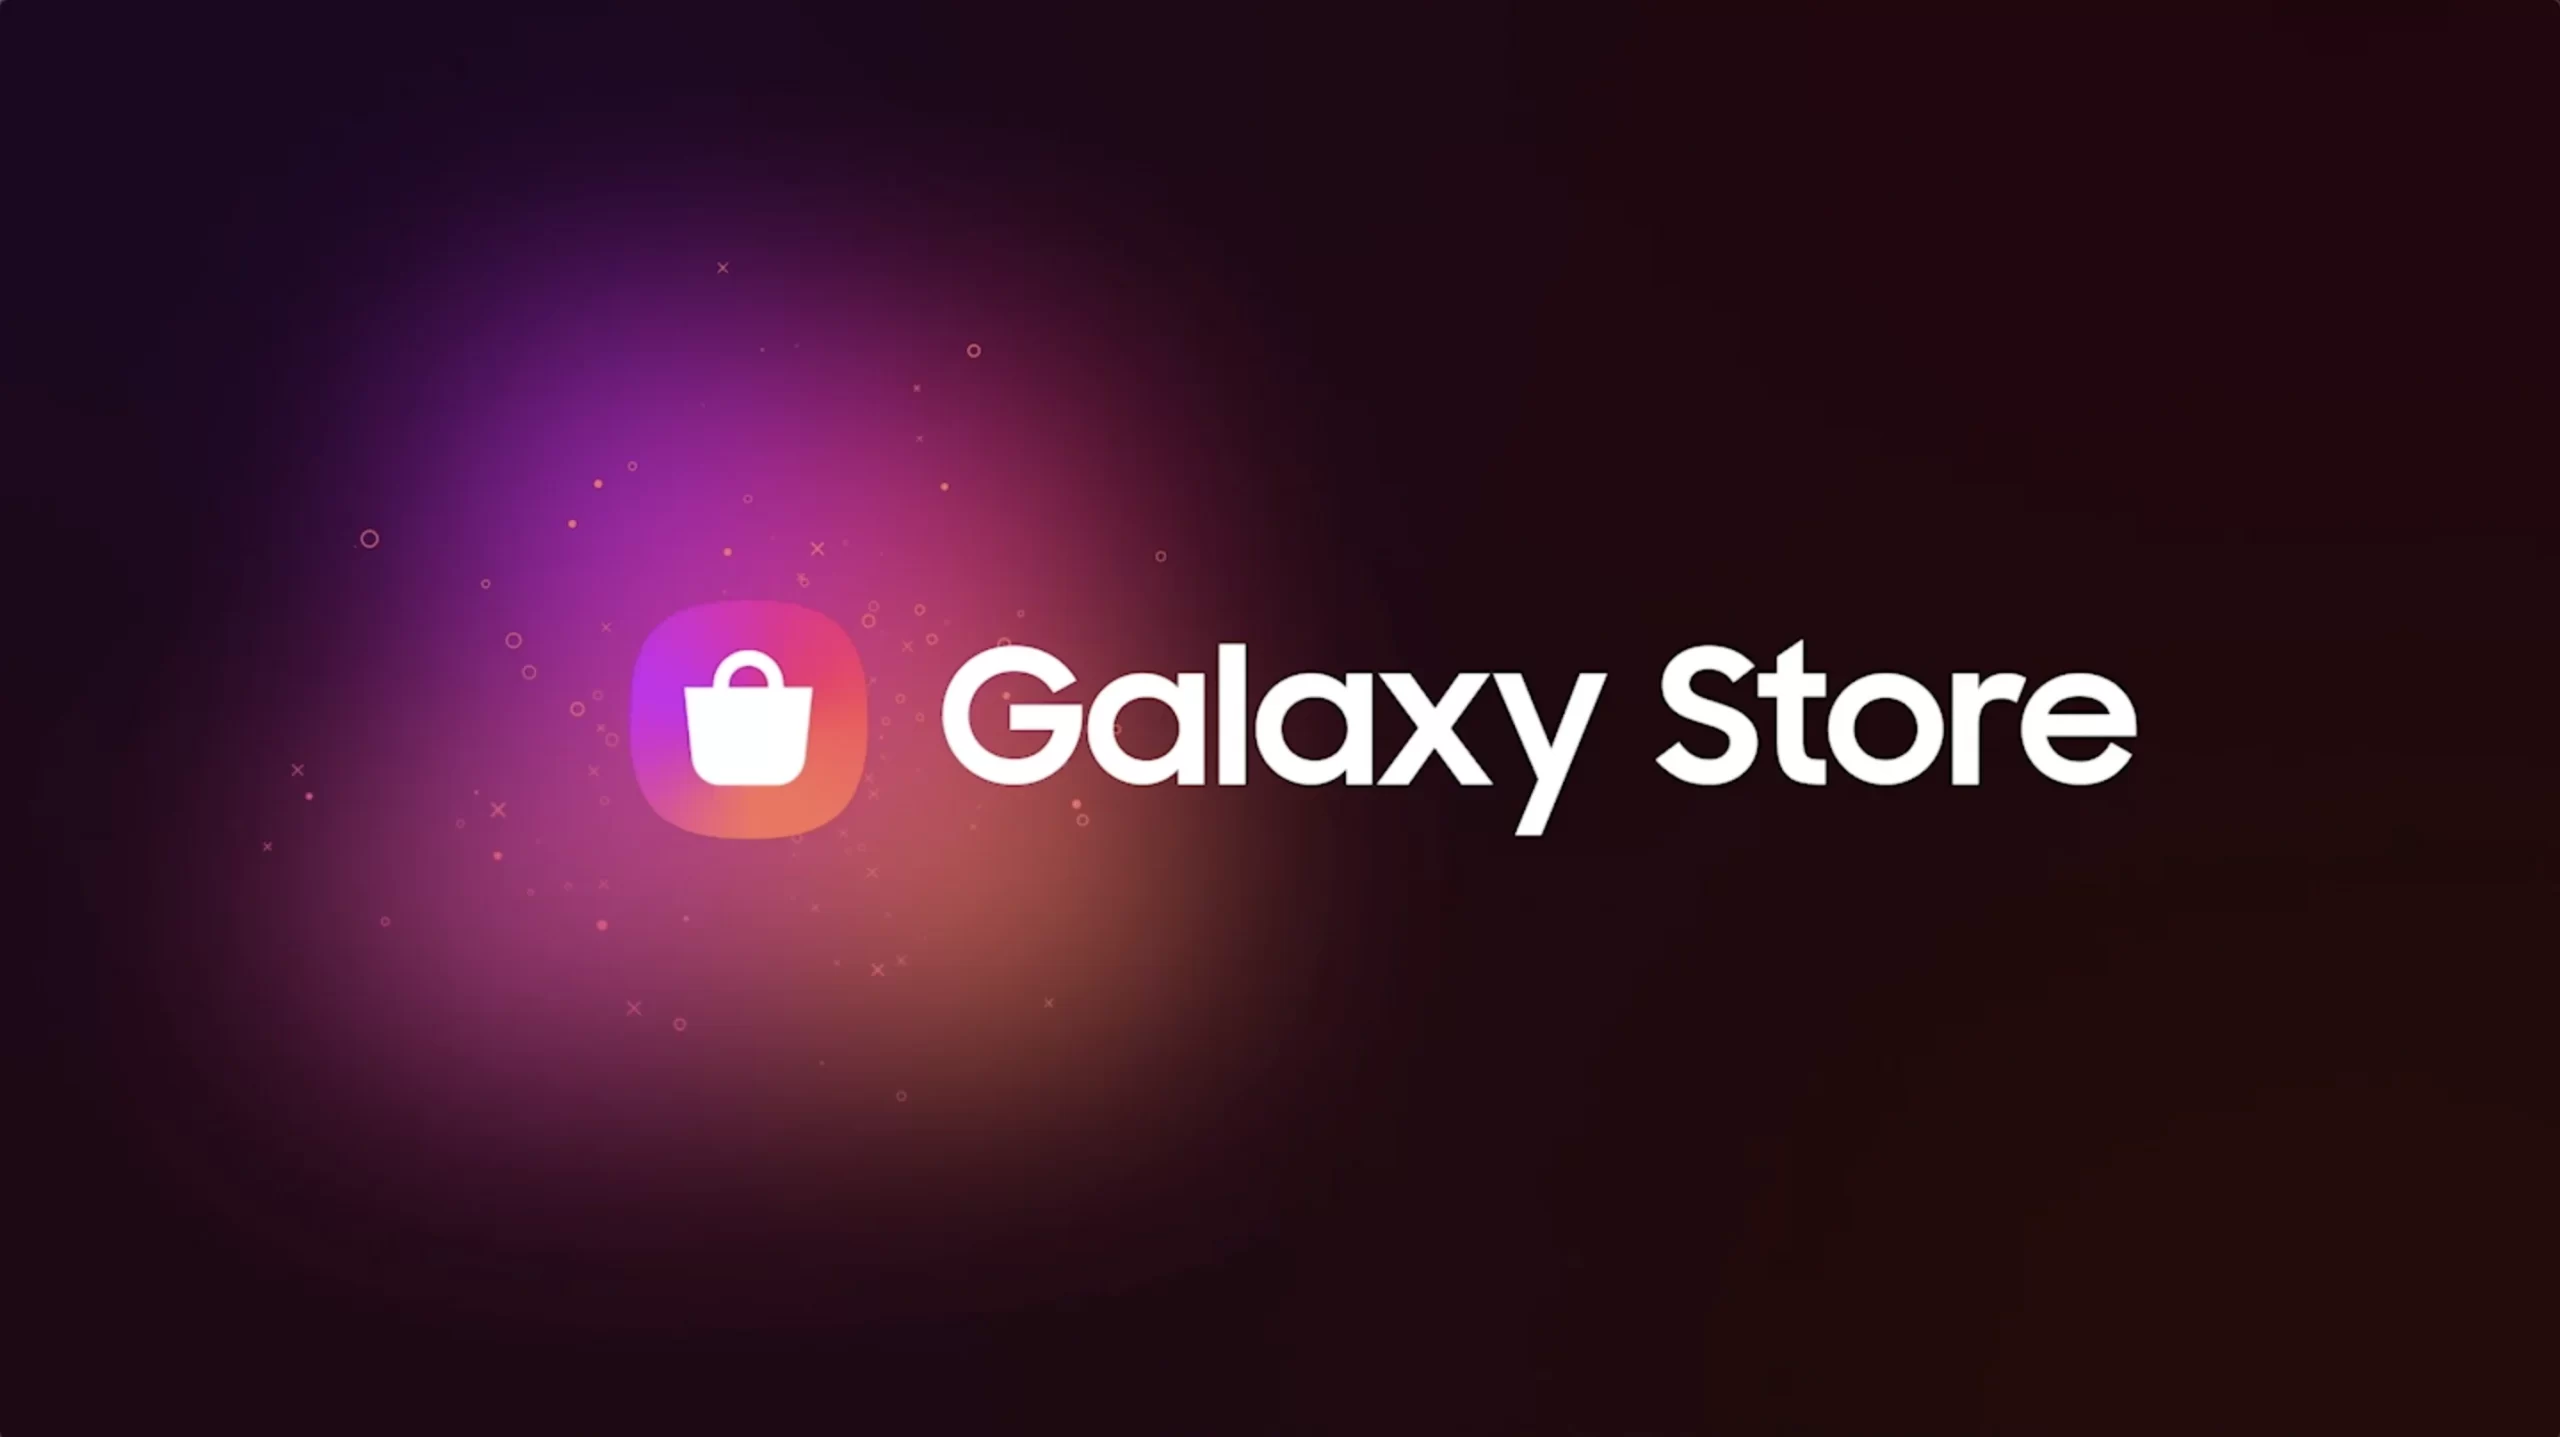 Galaxy Store APK Latest v6.6.09.9 Download Free For Android 1